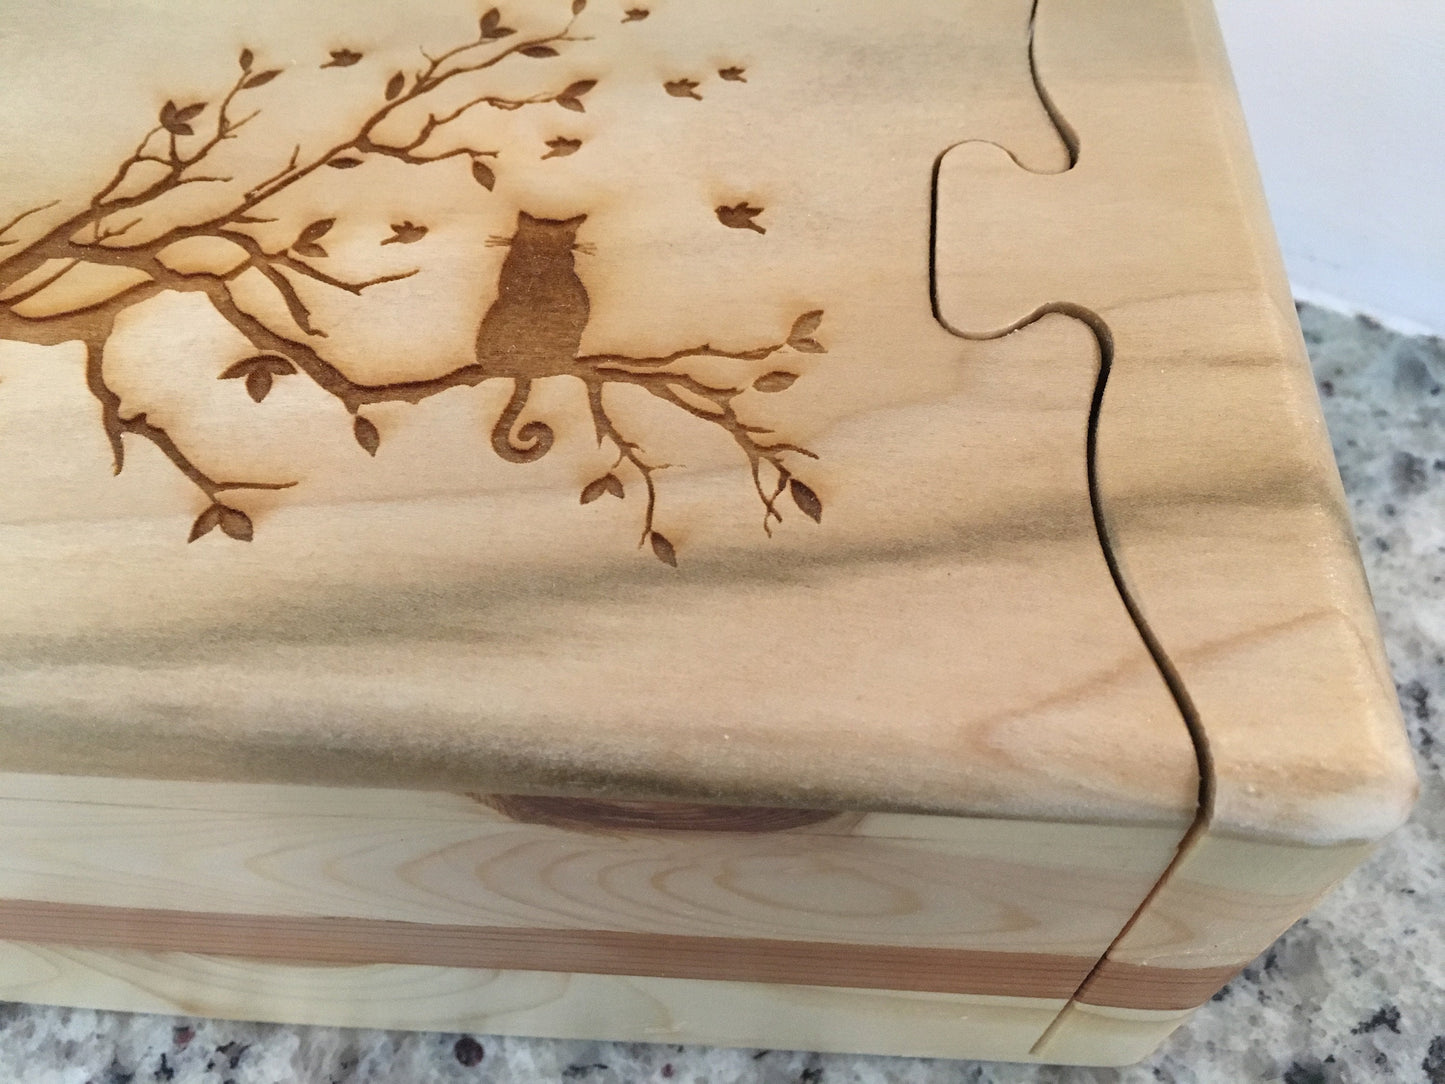 Solid Wood Puzzle Box - Cat in Tree, Wooden Box, Jewelry Box, Handcrafted, Custom Box, Personalized Box, Handmade, Box, Engraved, Stash Box